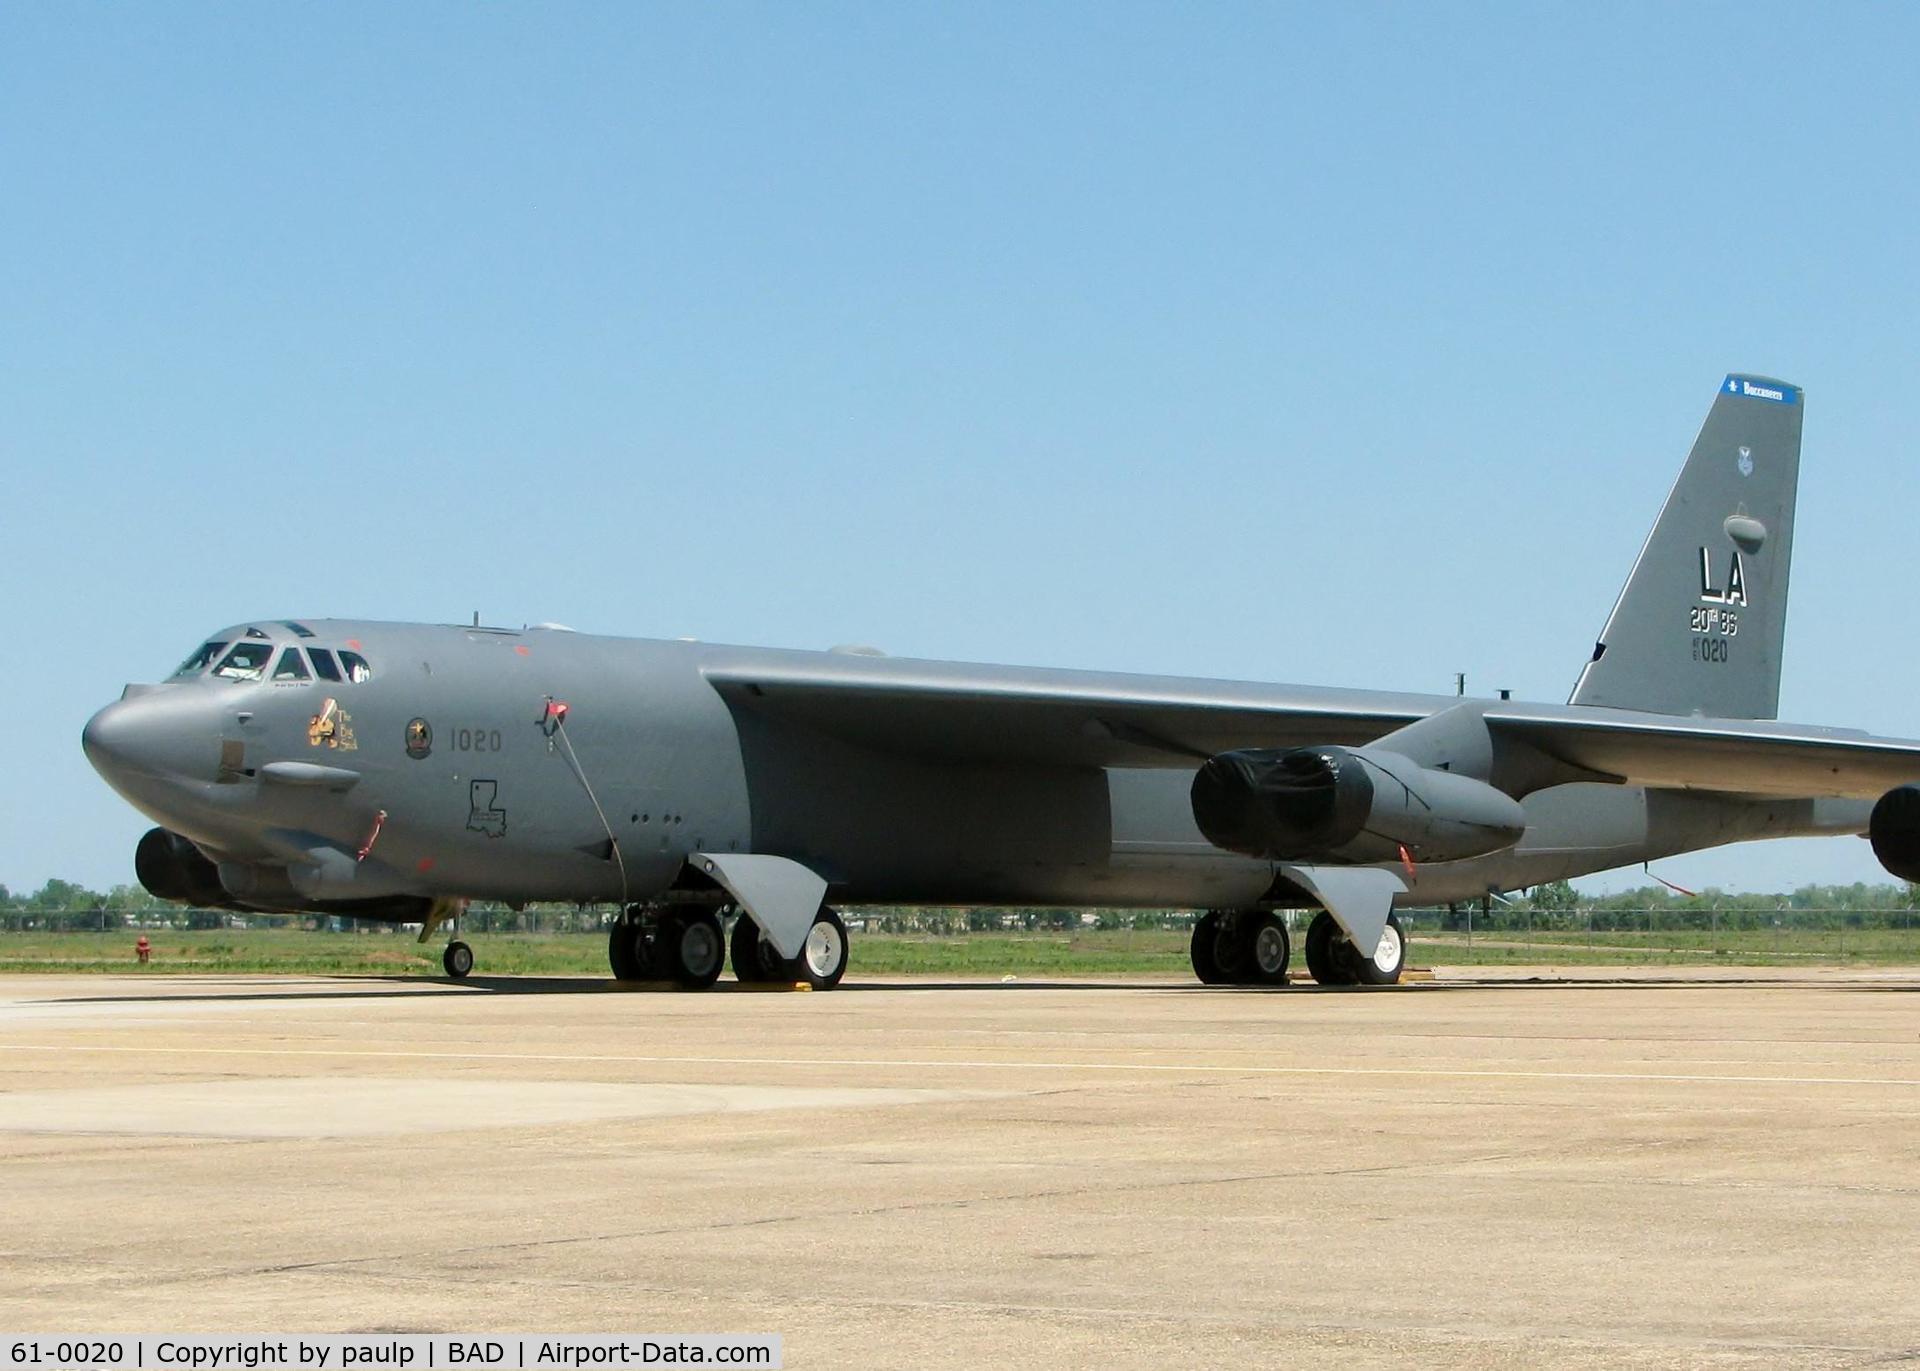 61-0020, 1961 Boeing B-52H Stratofortress C/N 464447, At Barksdale Air Force Base.